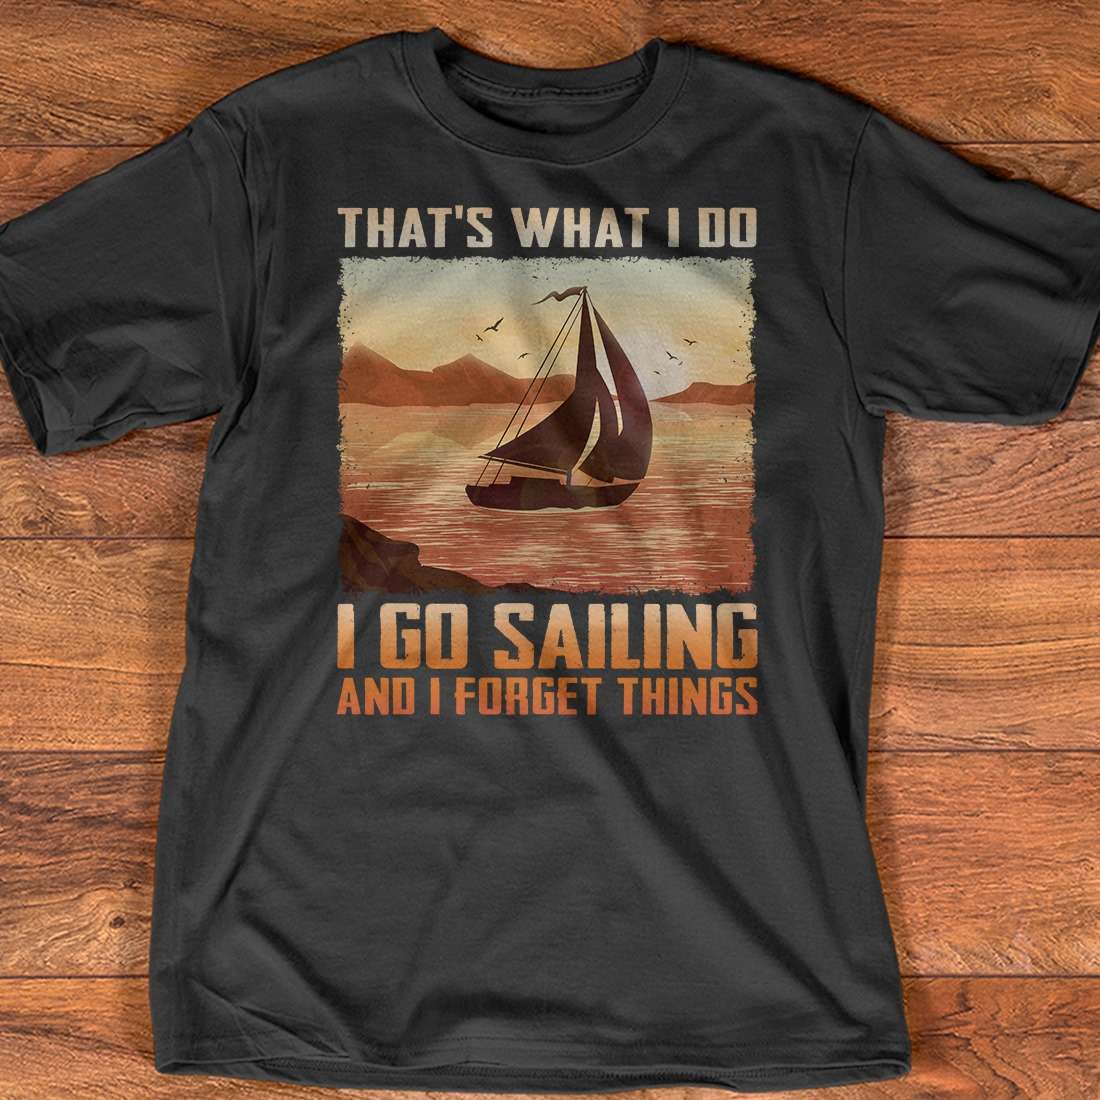 That's what I do I go sailing and I forget things - Sailing on the ocean, sailing the boat